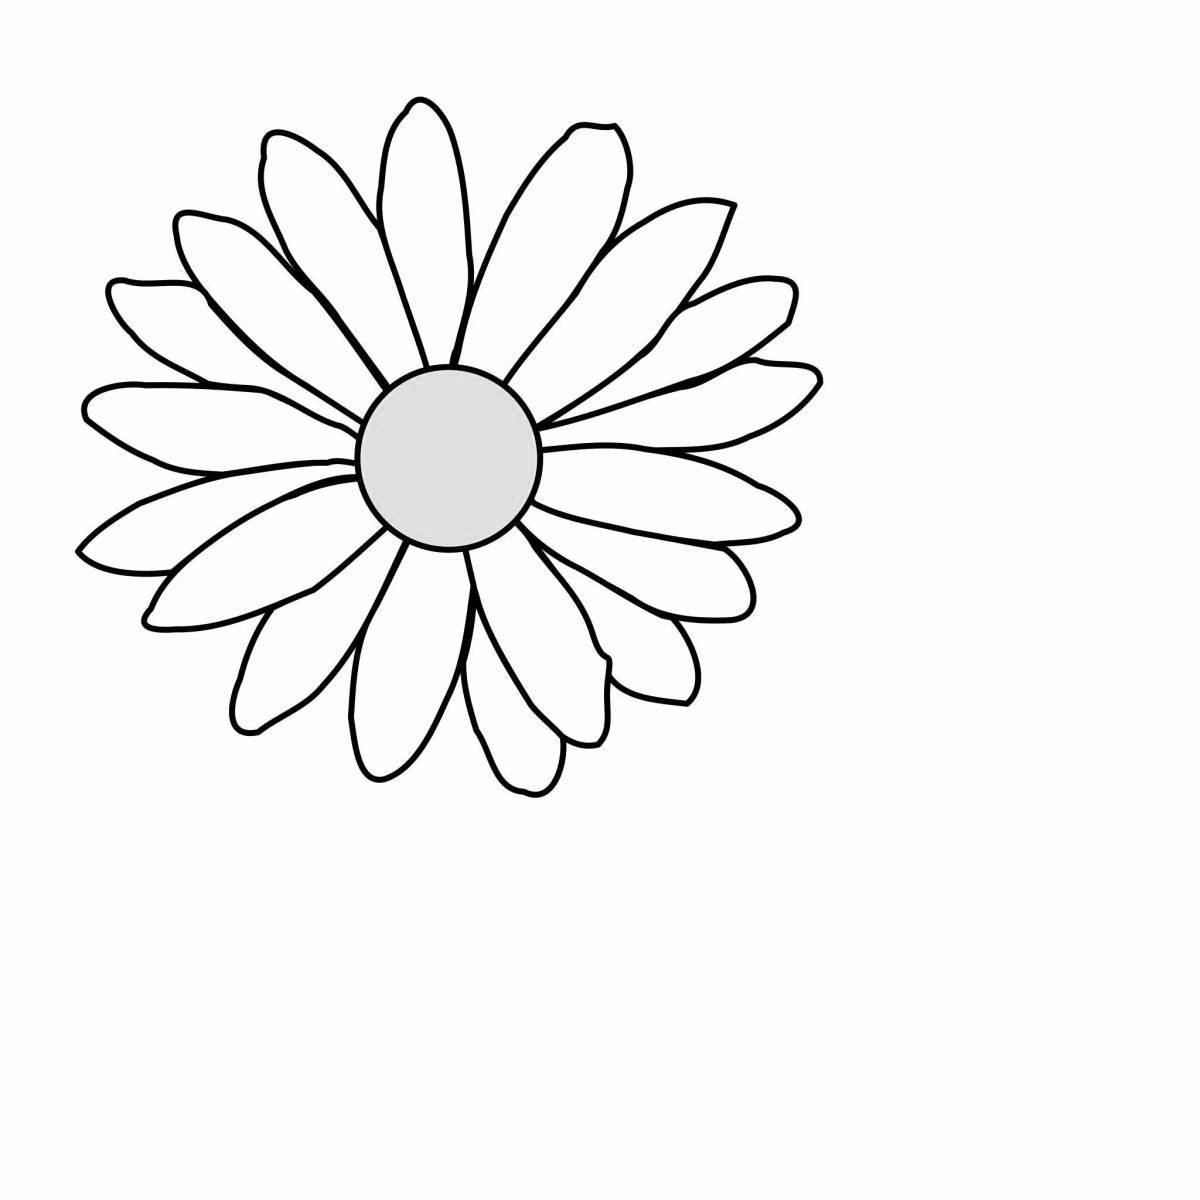 Coloring page wonderful drawing of chamomile